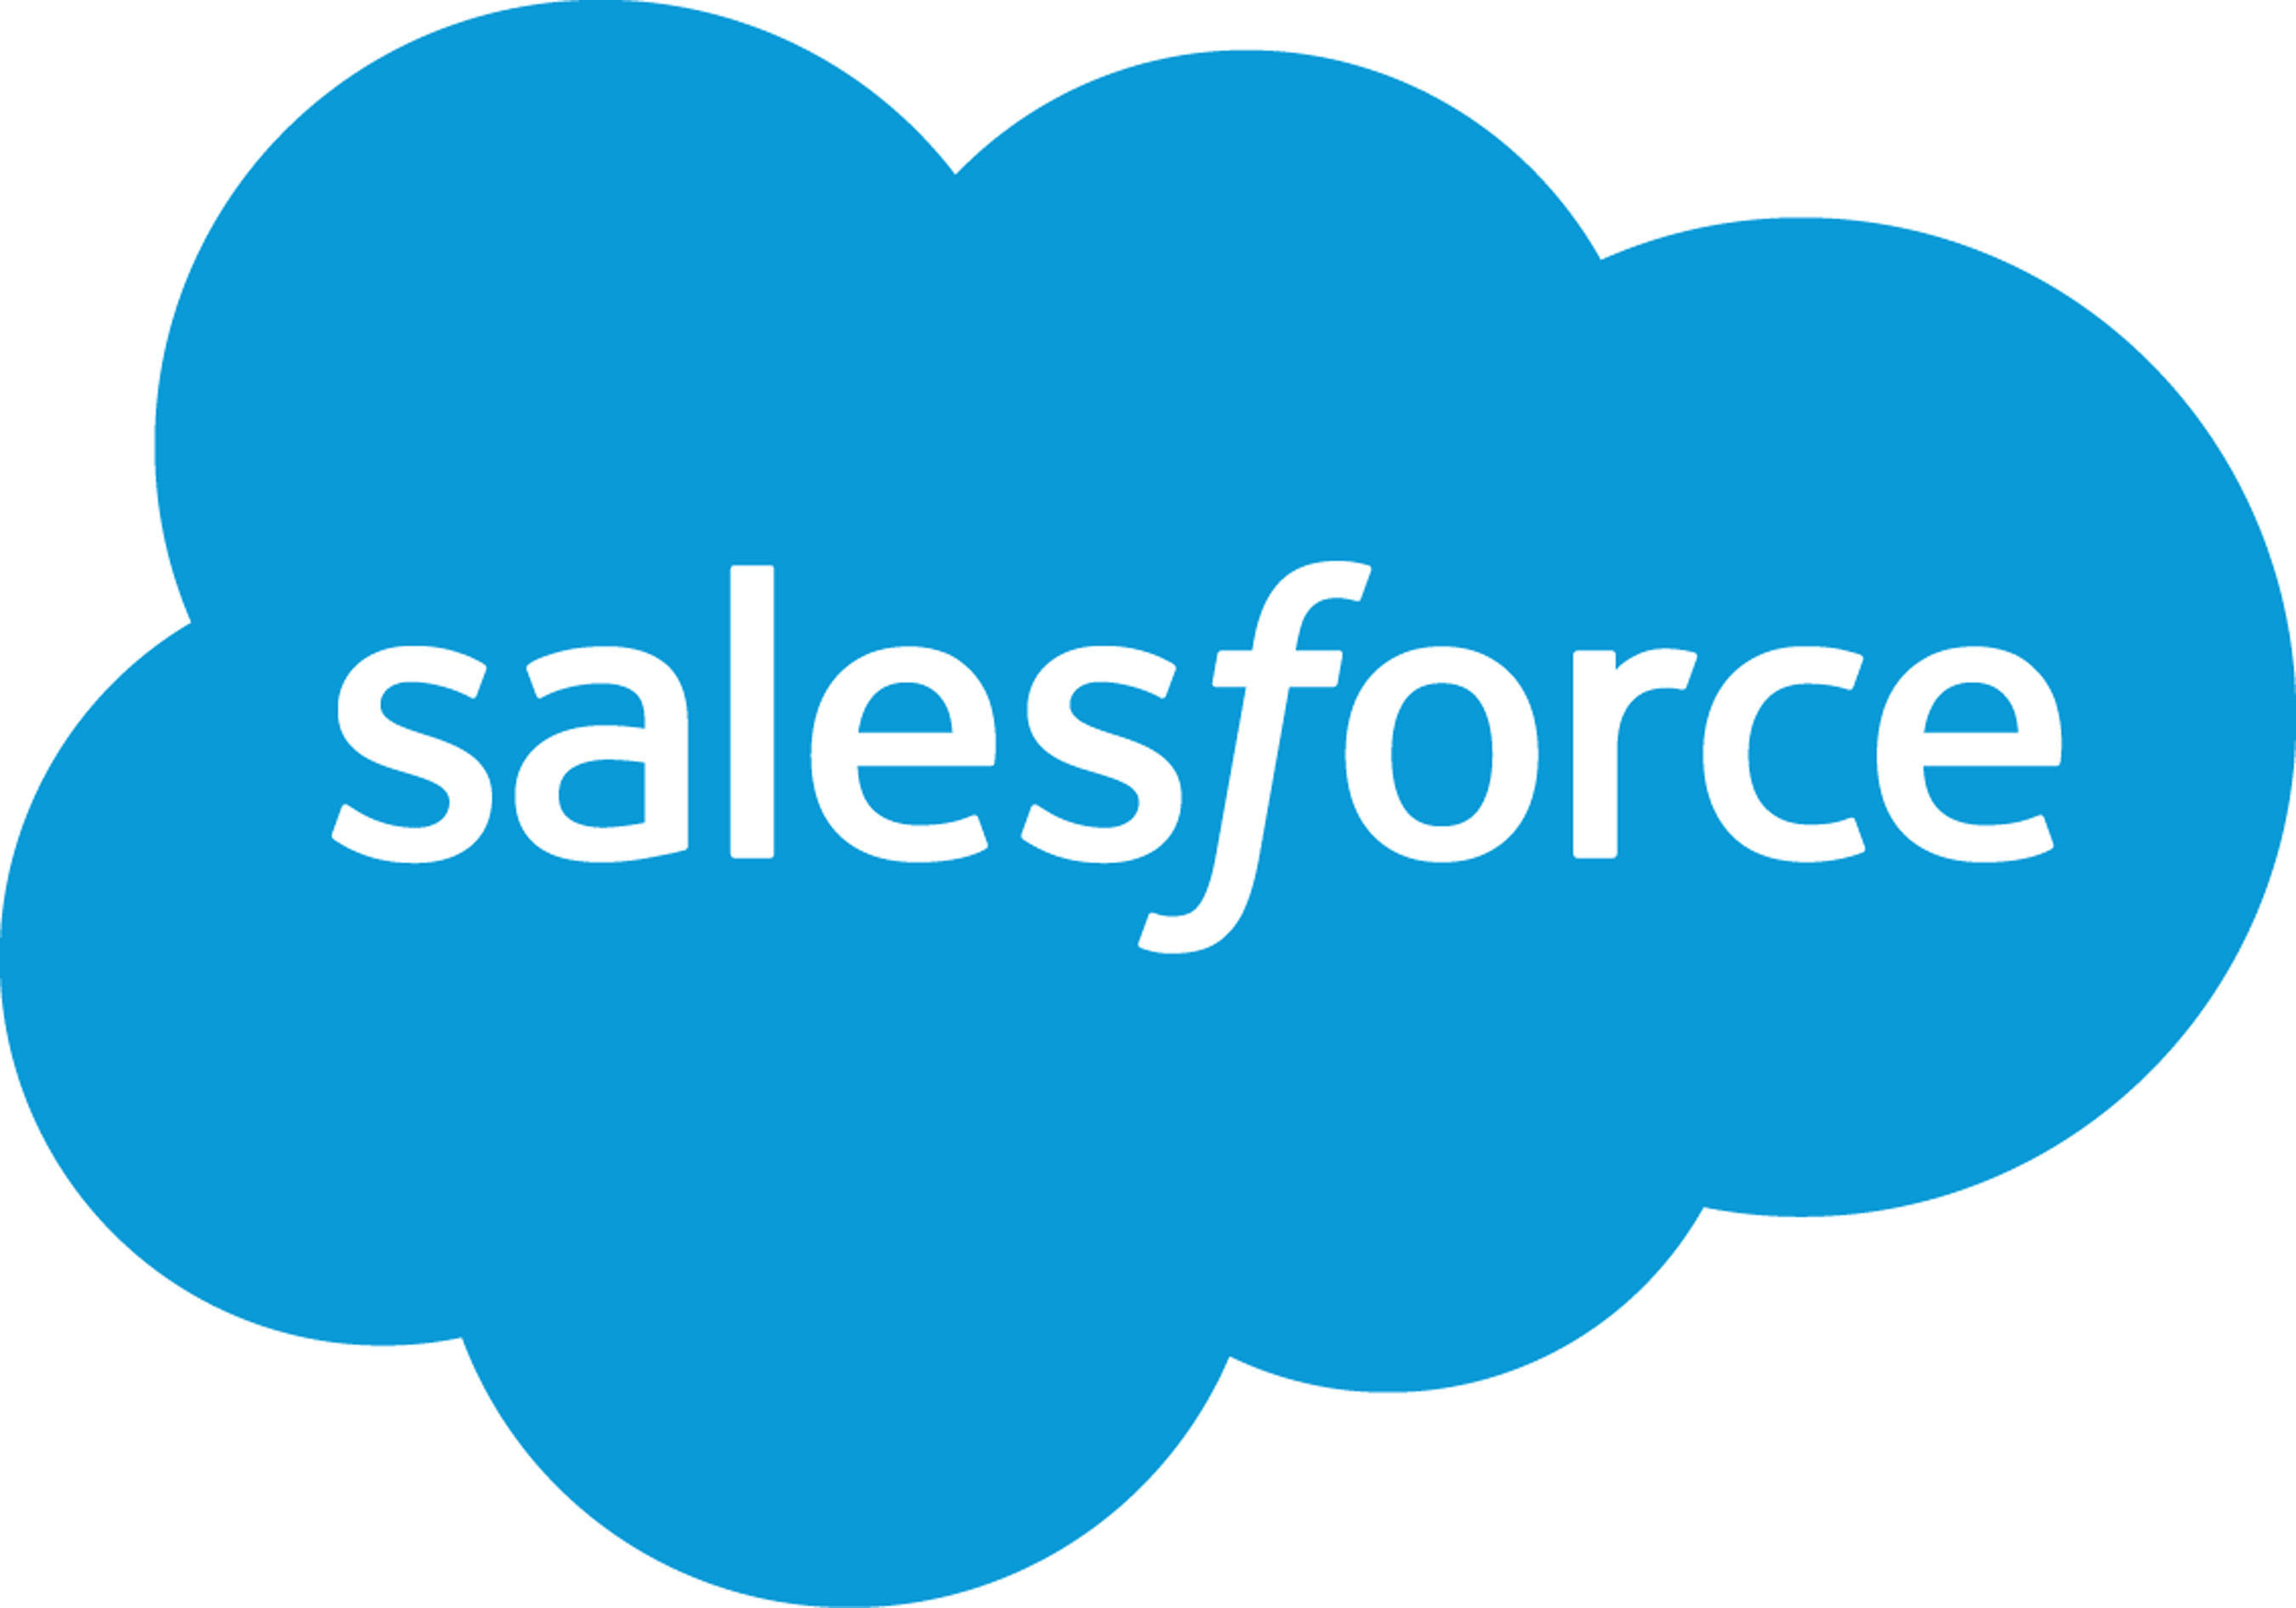 Salesforce Announces Timing of its Third Quarter Fiscal 2020 Results Conference Call